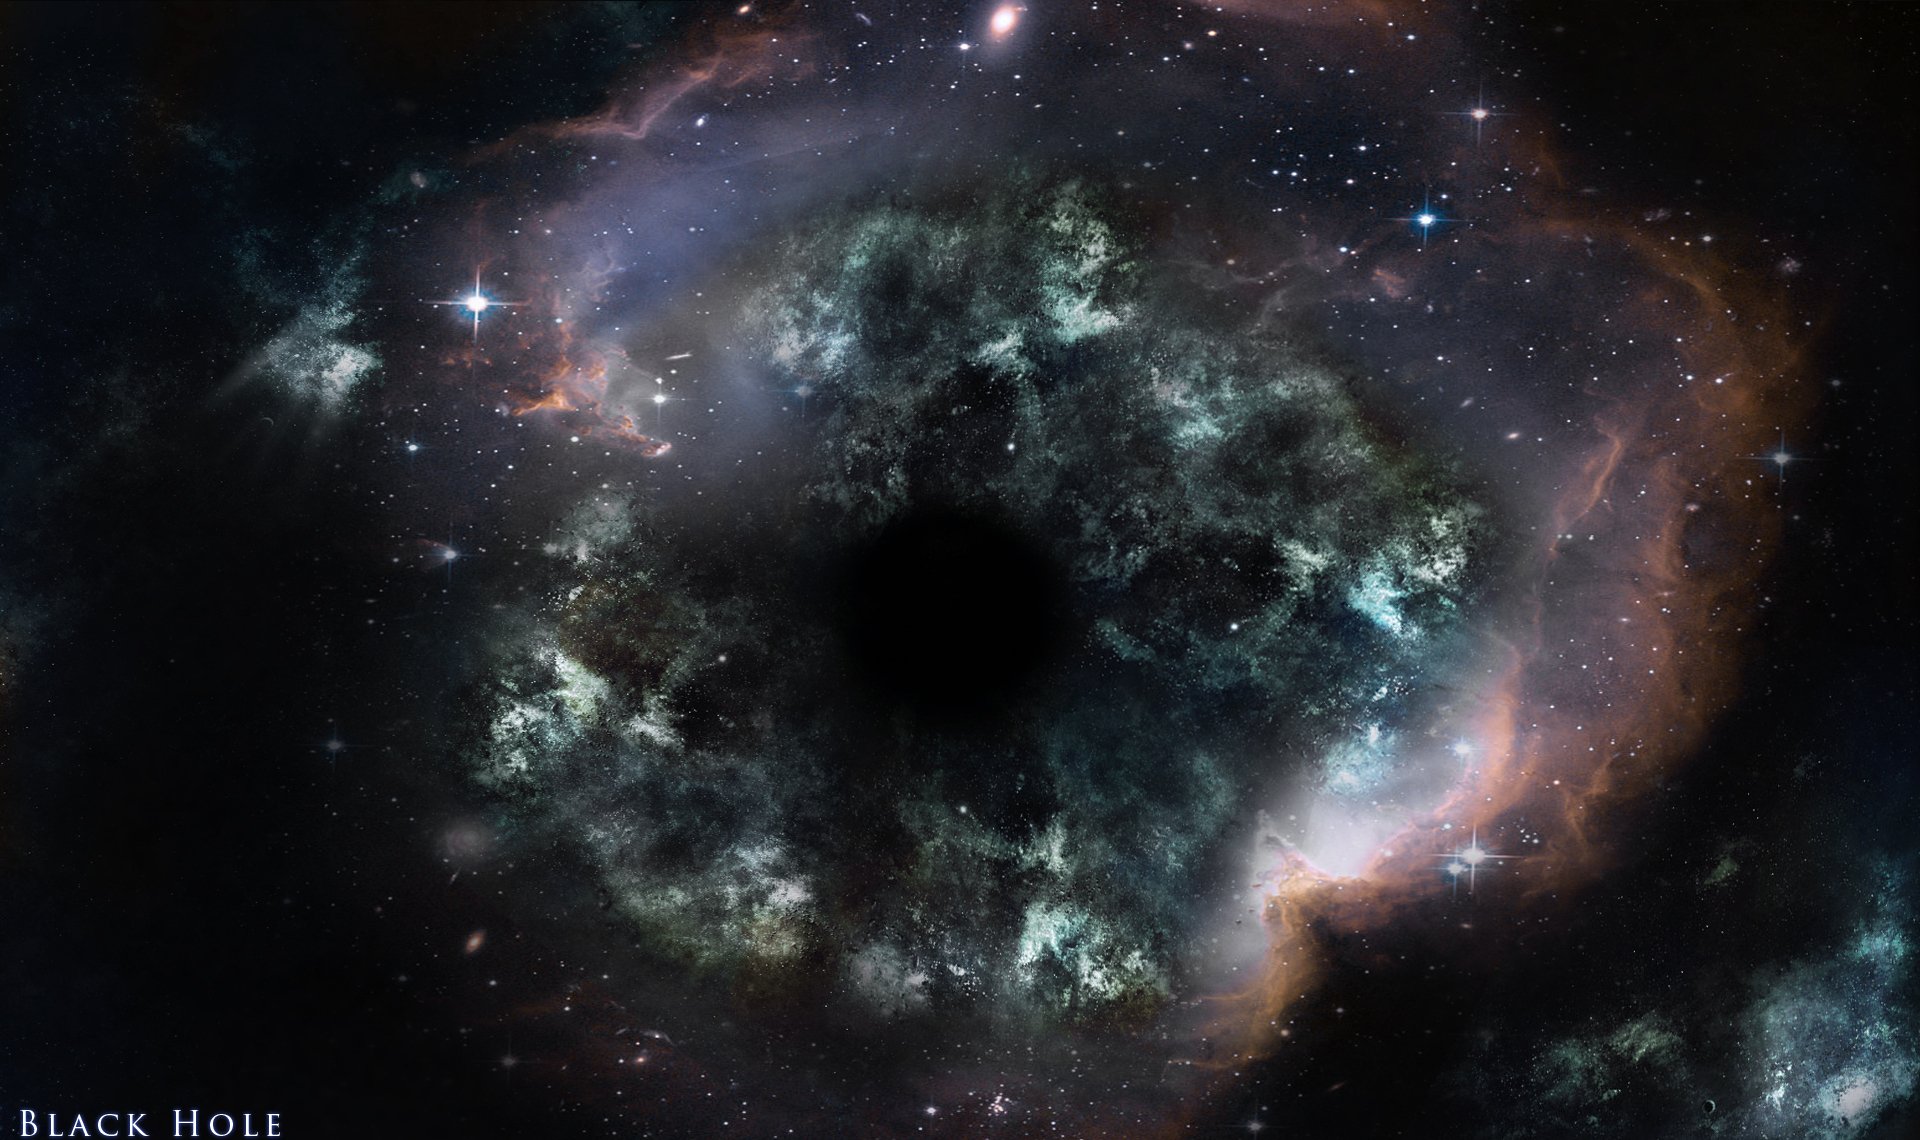 Black Hole Full HD Wallpaper and Background Image | 1920x1140 | ID:206214